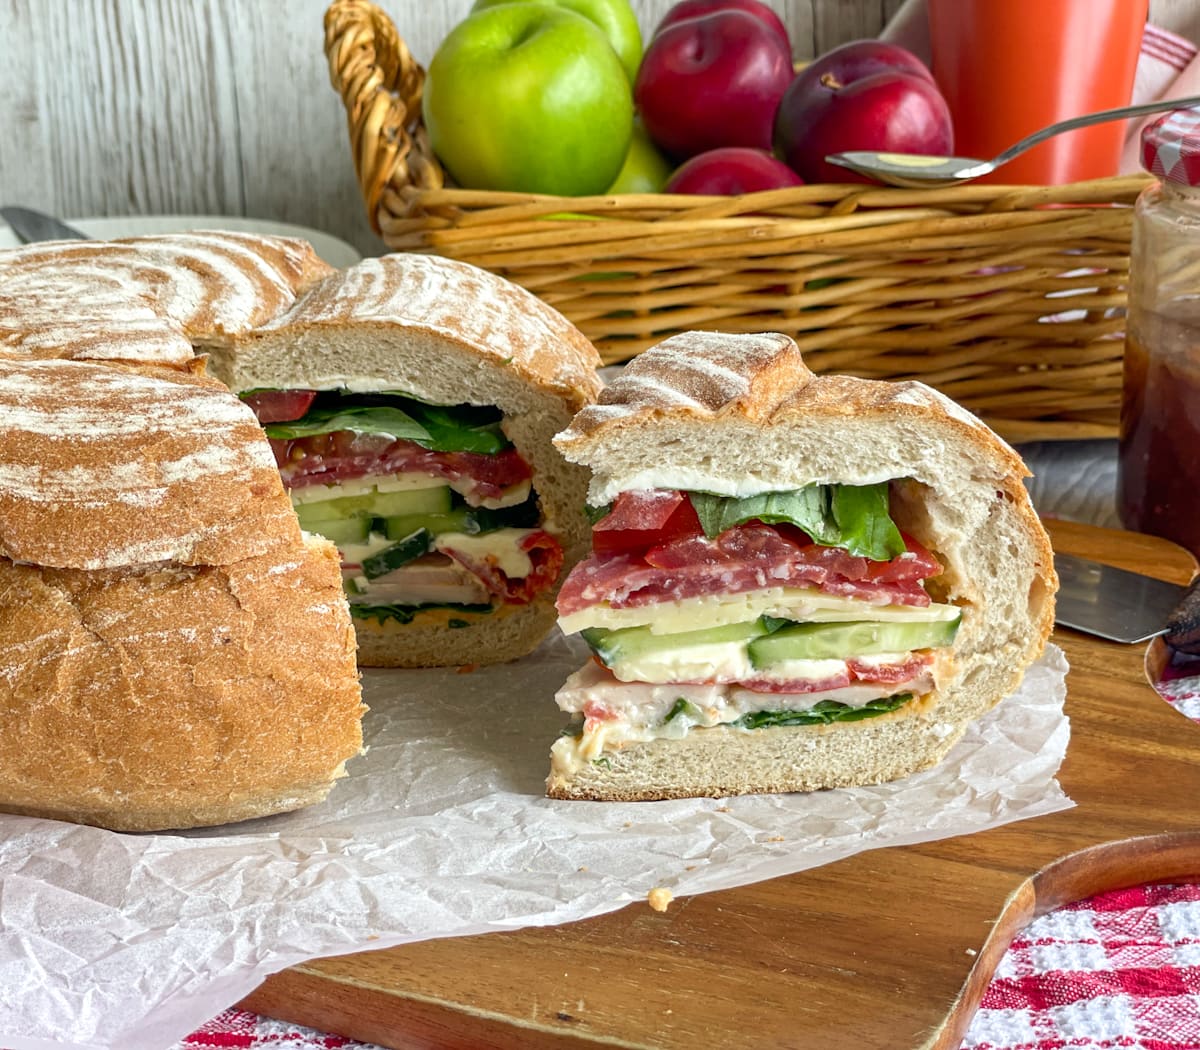 A round loaf filled with layers of fresh salad ingredients, deli meats and cheese, sliced in a cake form